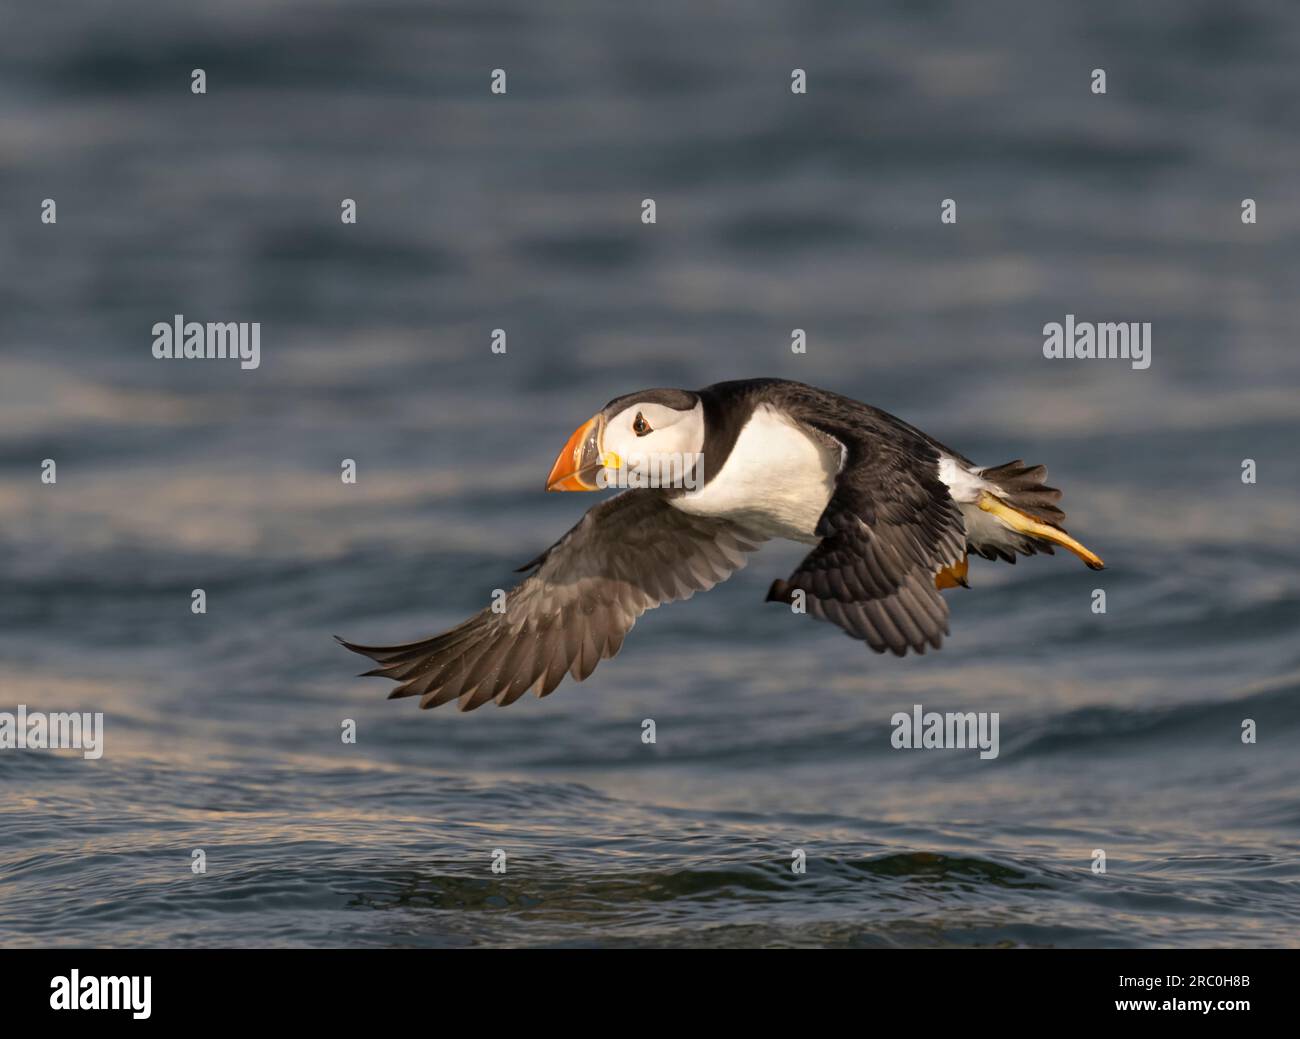 Atlantic Puffin flying over North Sea Stock Photo